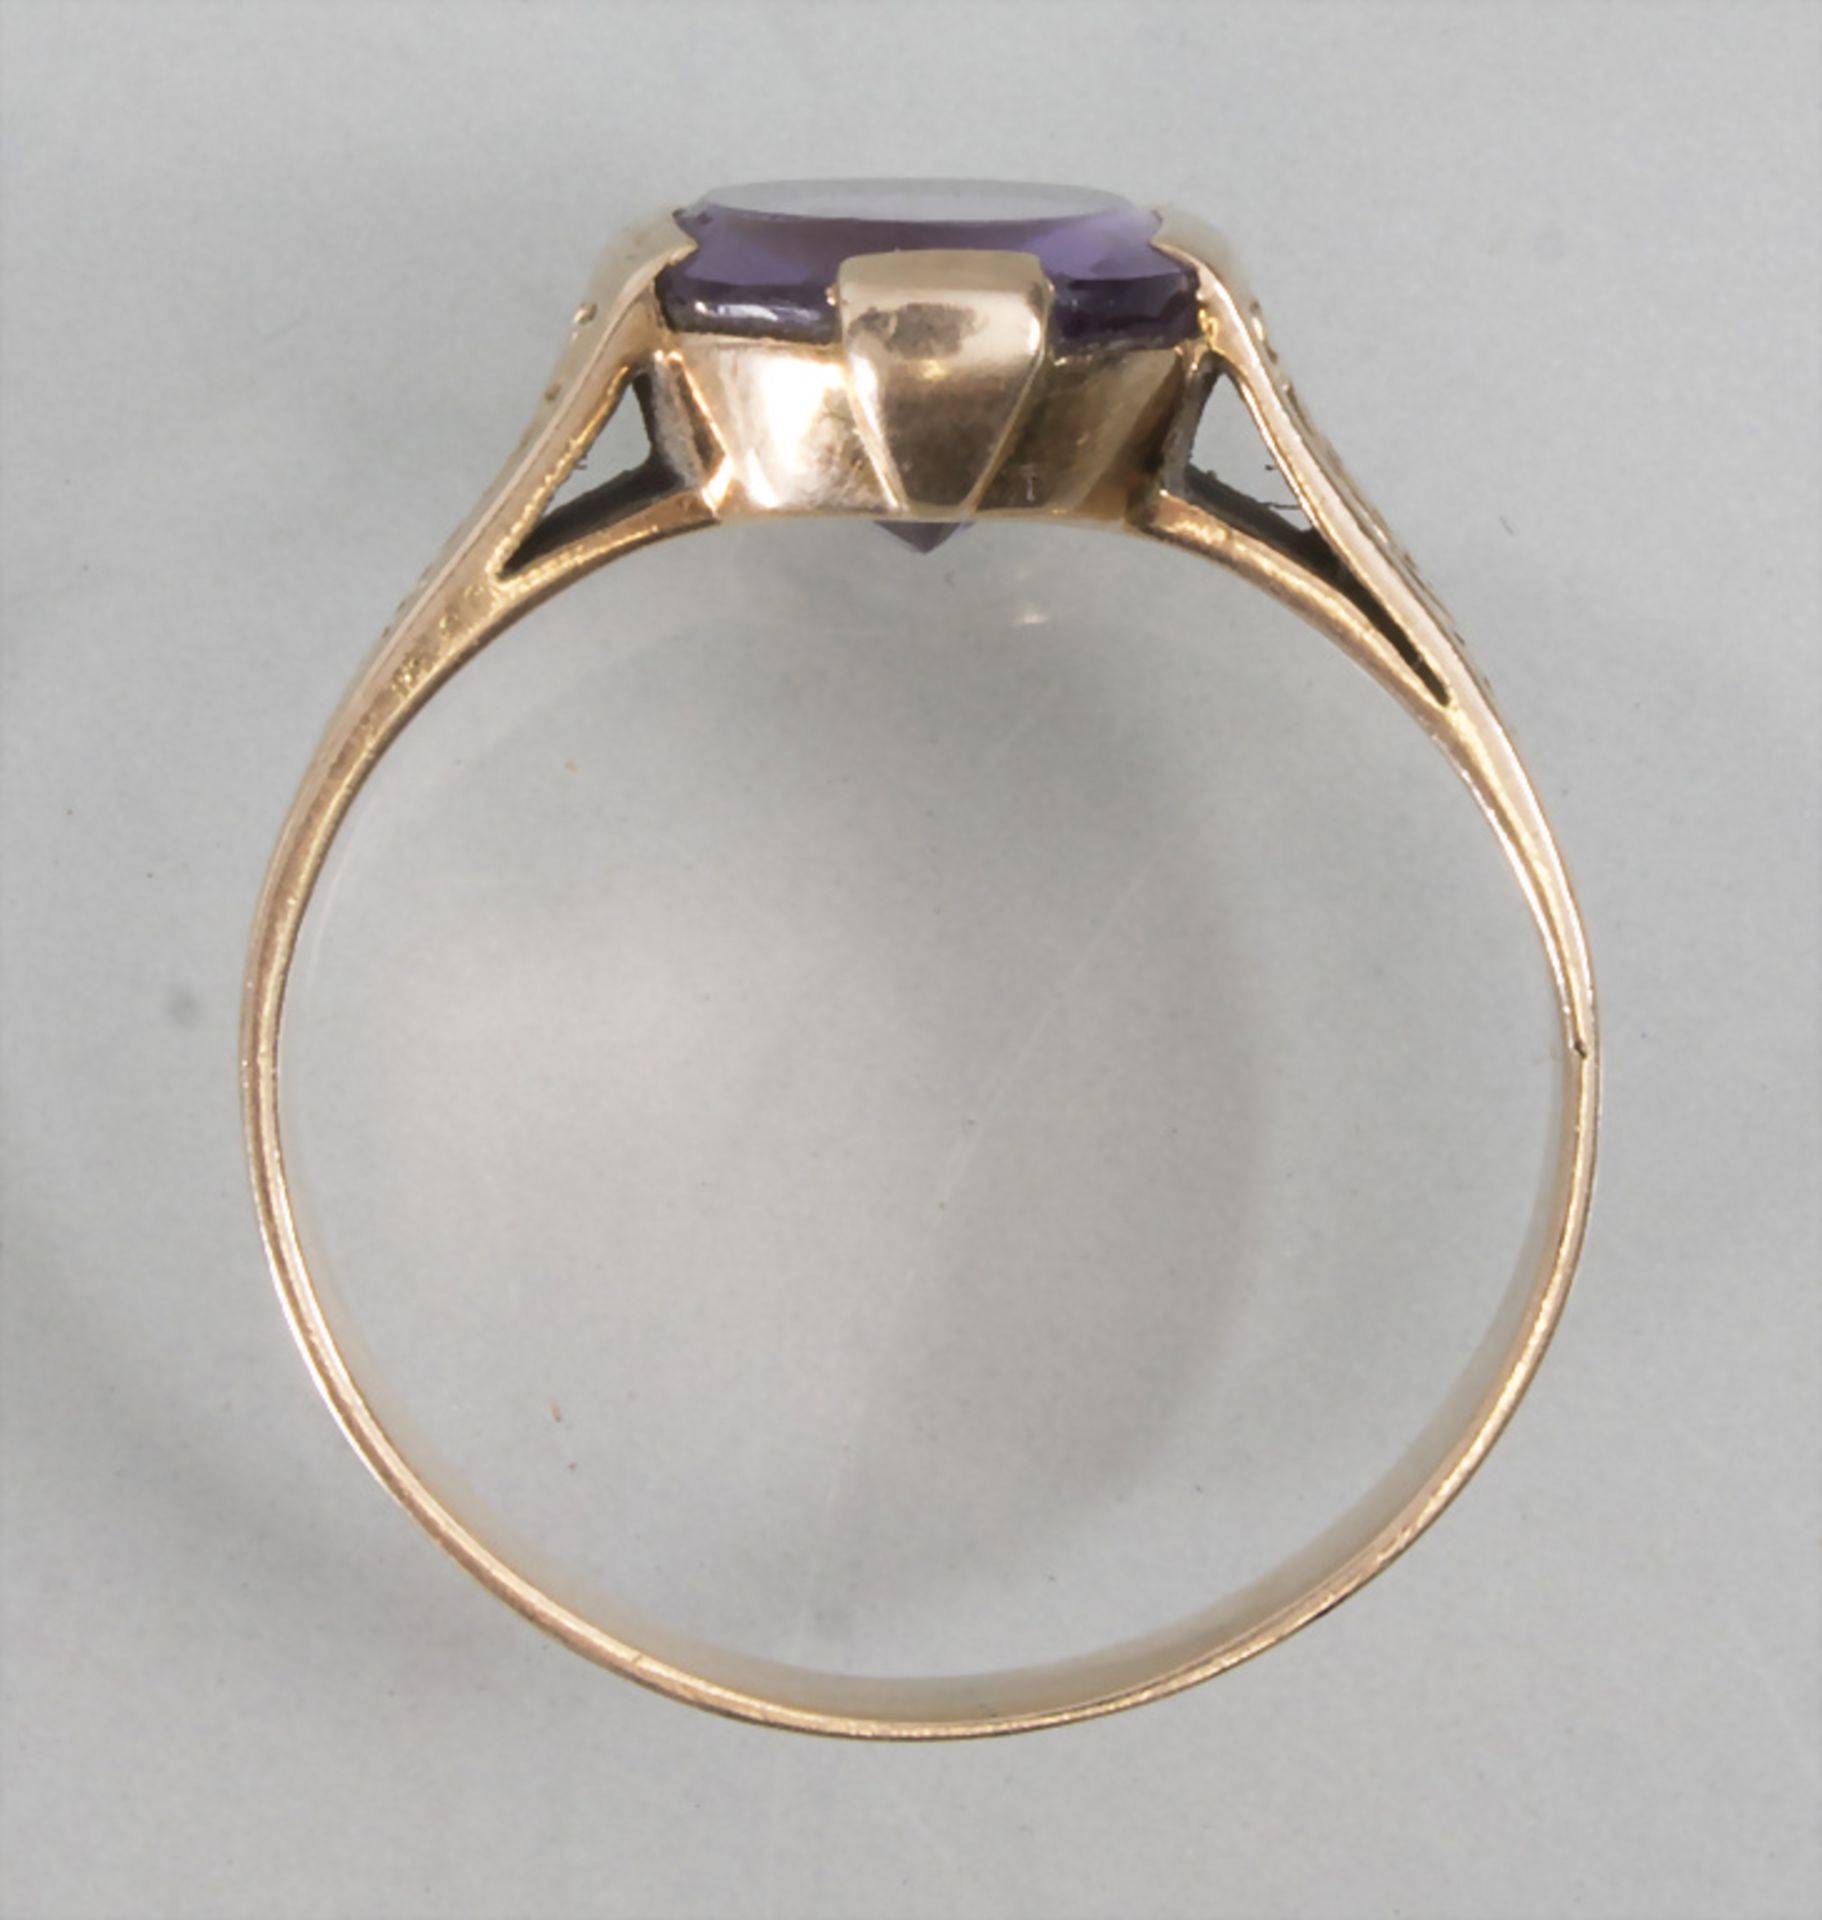 Damenring mit Amethyst / A ladies 14k gold ring with amethyst - Image 2 of 2